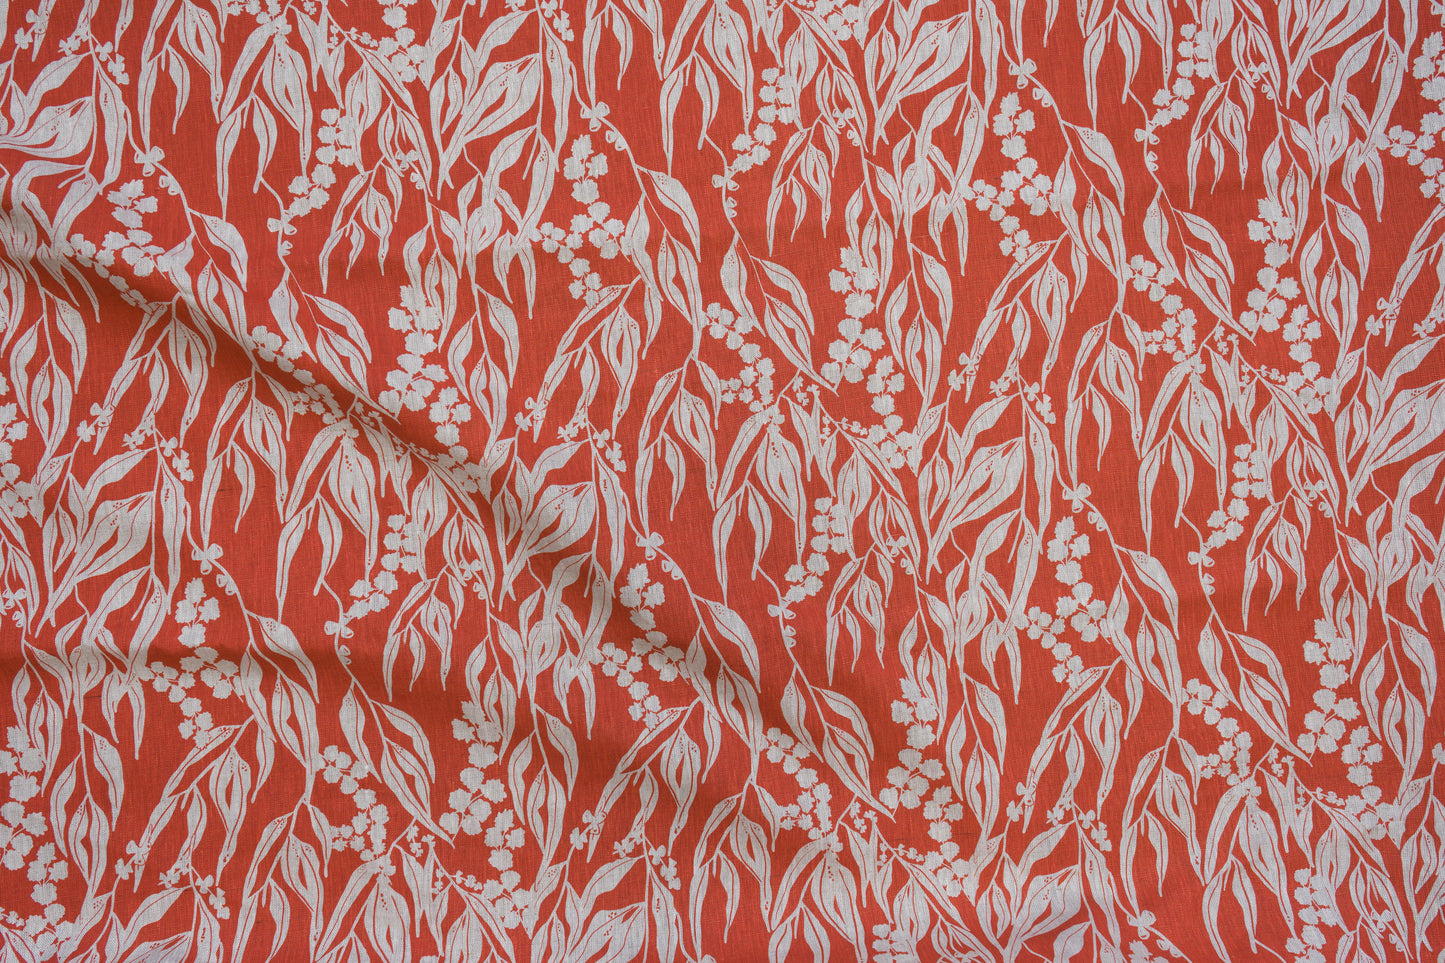 Linen Fabric - Nuts about Wattle in Guava on oatmeal linen